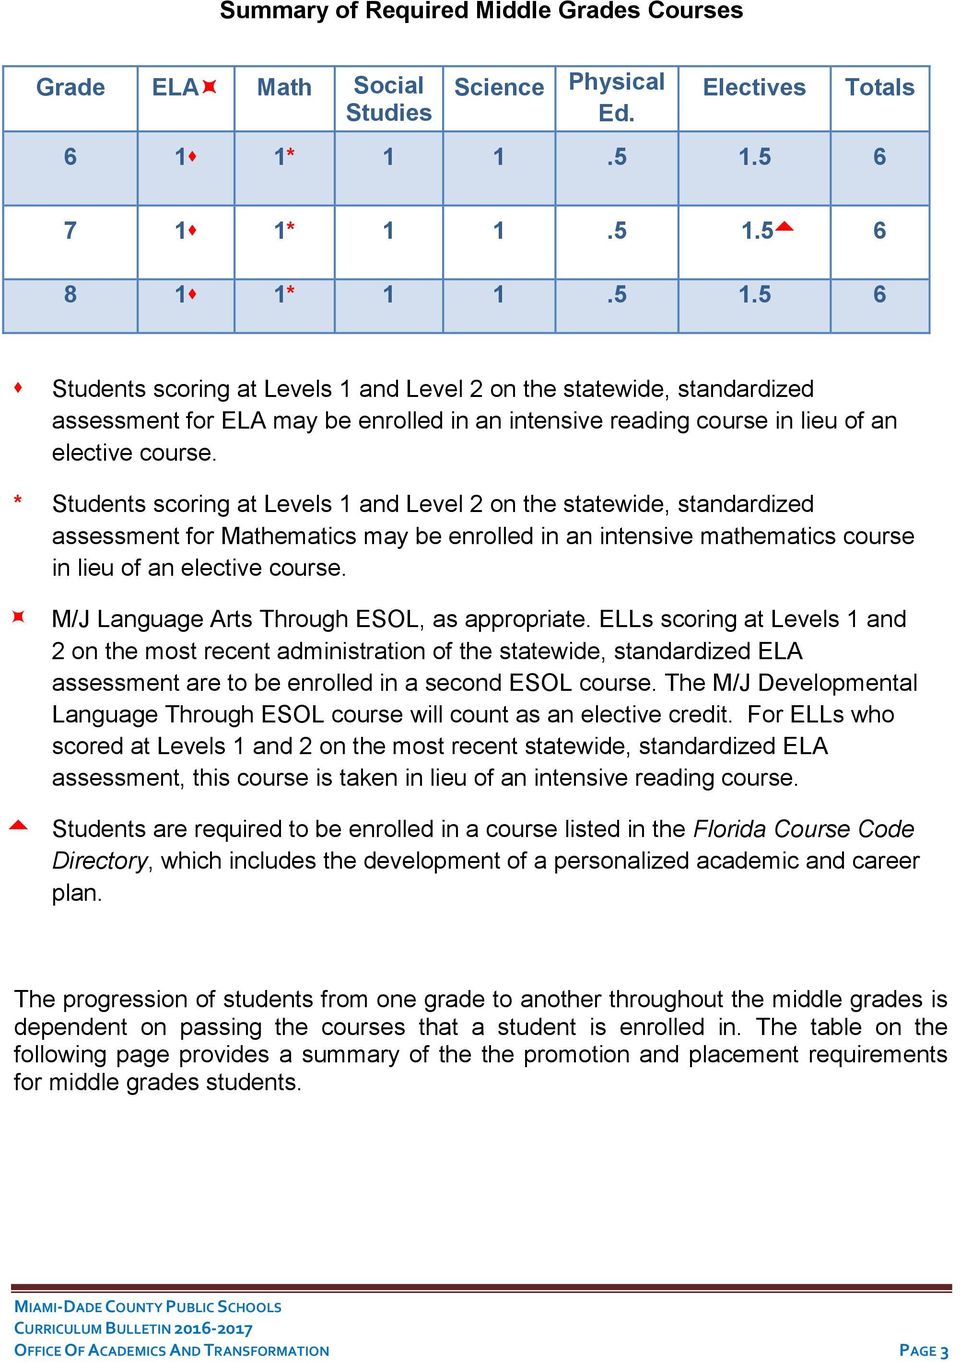 * Students scoring at Levels 1 and Level 2 on the statewide, standardized assessment for Mathematics may be enrolled in an intensive mathematics course in lieu of an elective course.